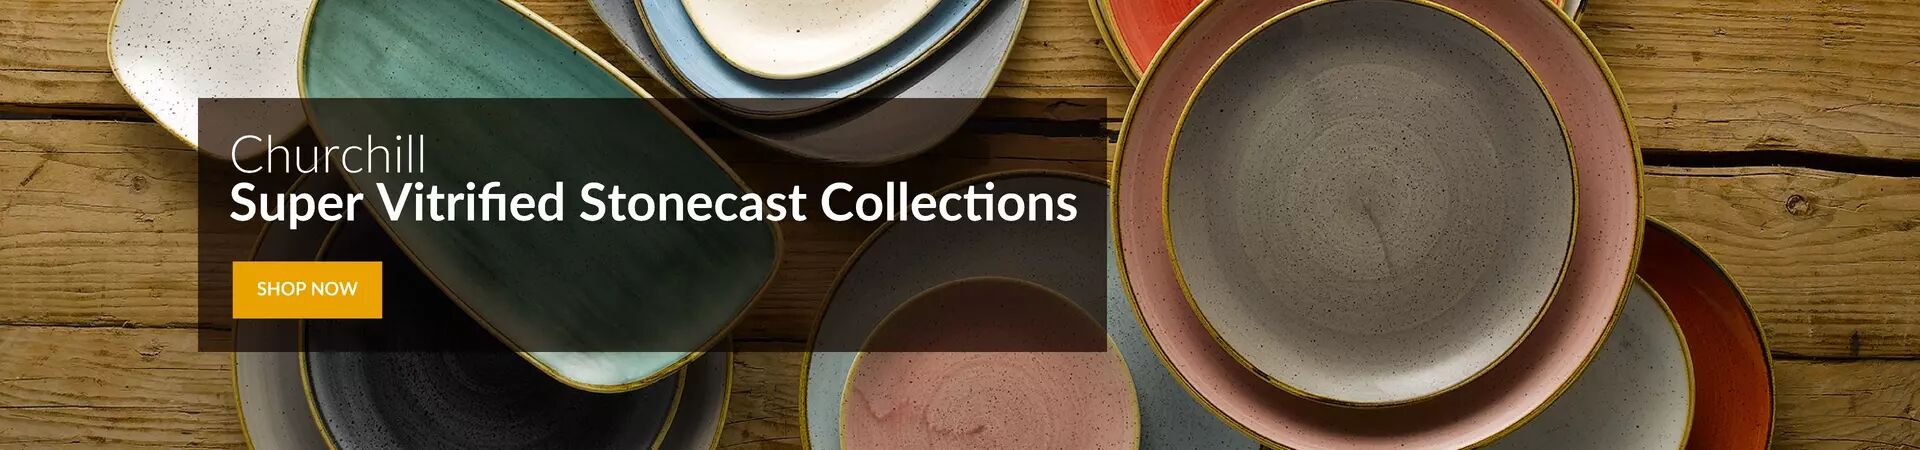 Churchill Stonecast Collections